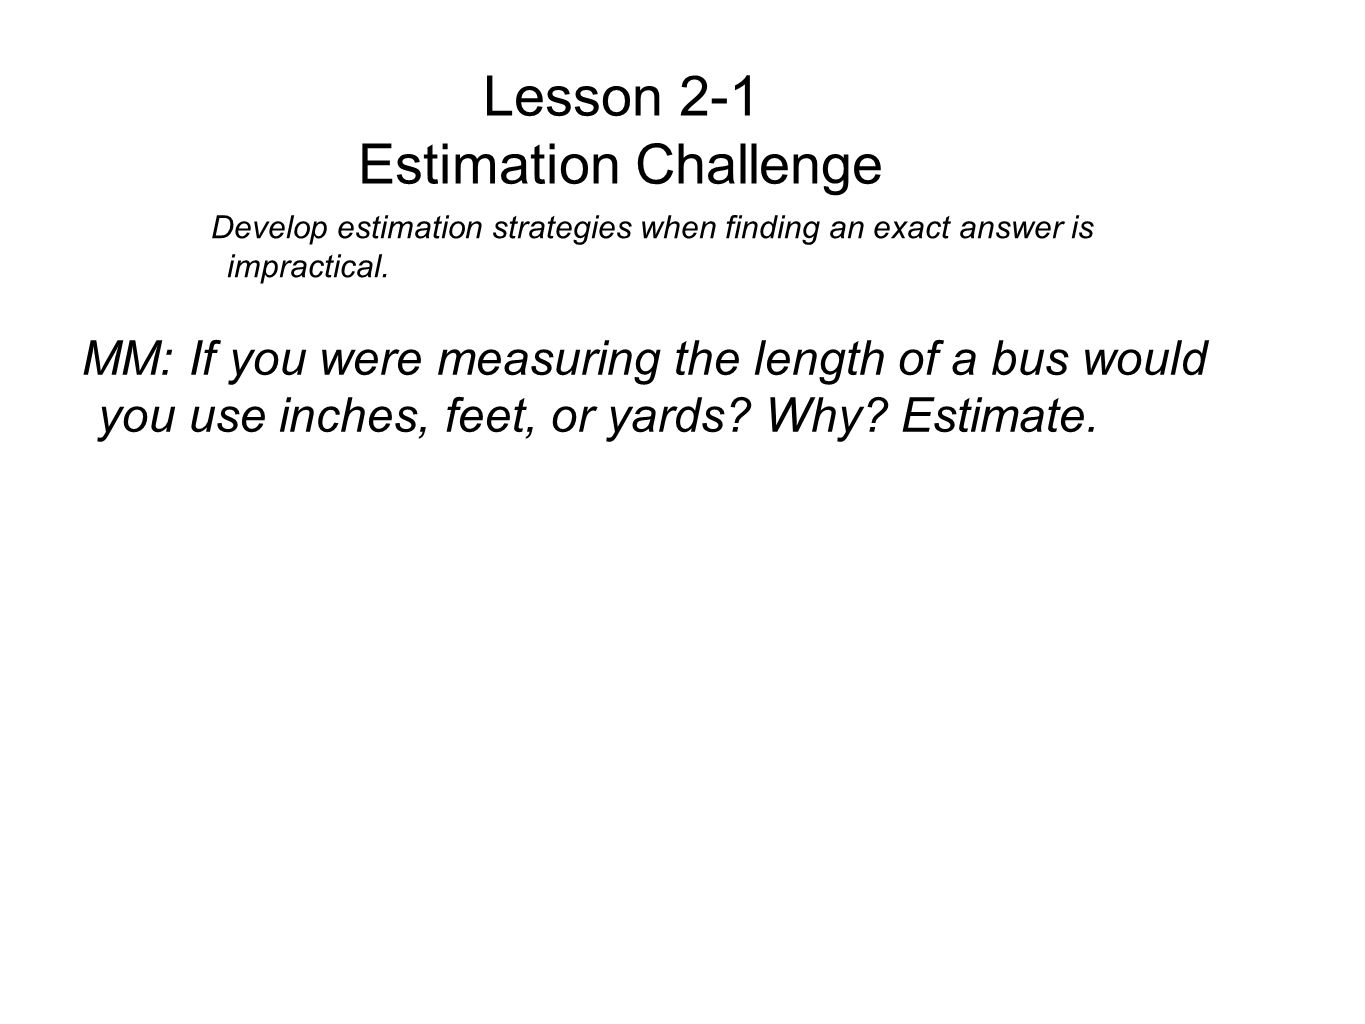 Lesson 2-1 Estimation Challenge Develop estimation strategies when finding an exact answer is impractical.